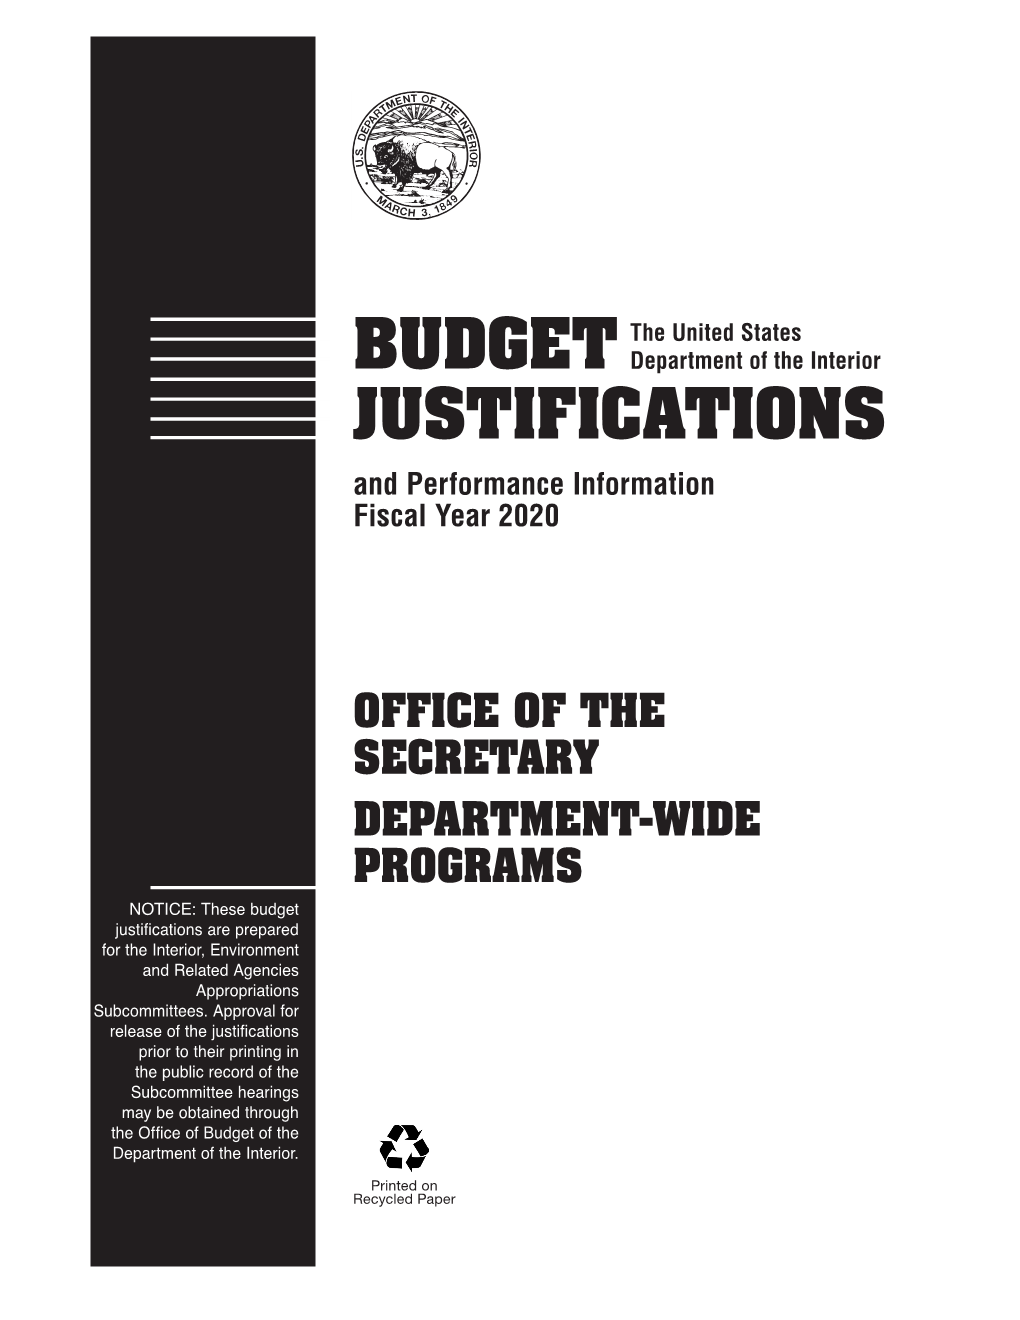 Budget Justification and Performance Information FY 2020, Office of The